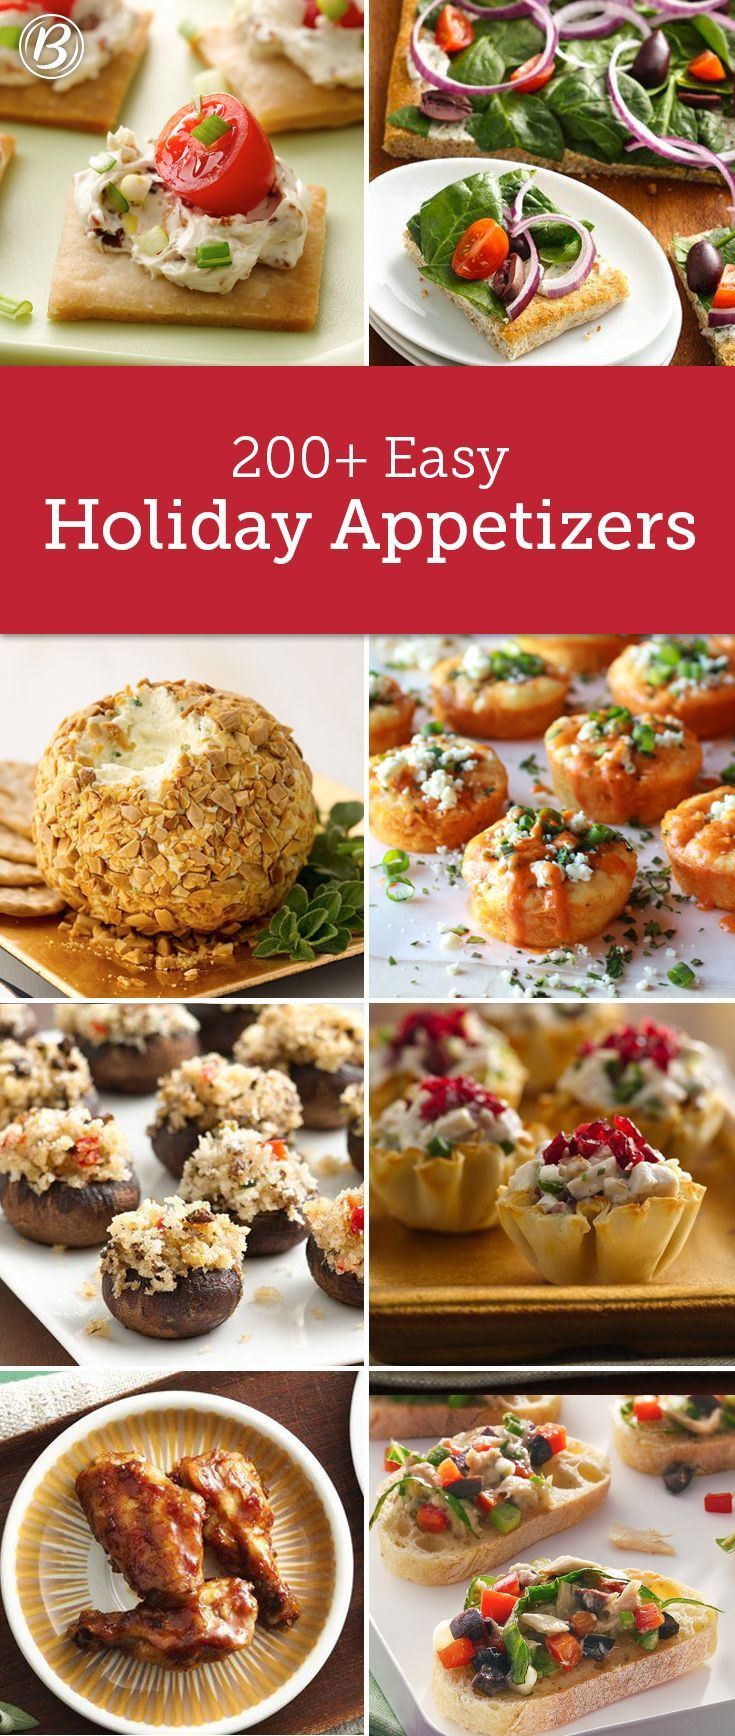 Heavy Appetizers For Christmas Party
 55 Festive Apps for Your Christmas Party